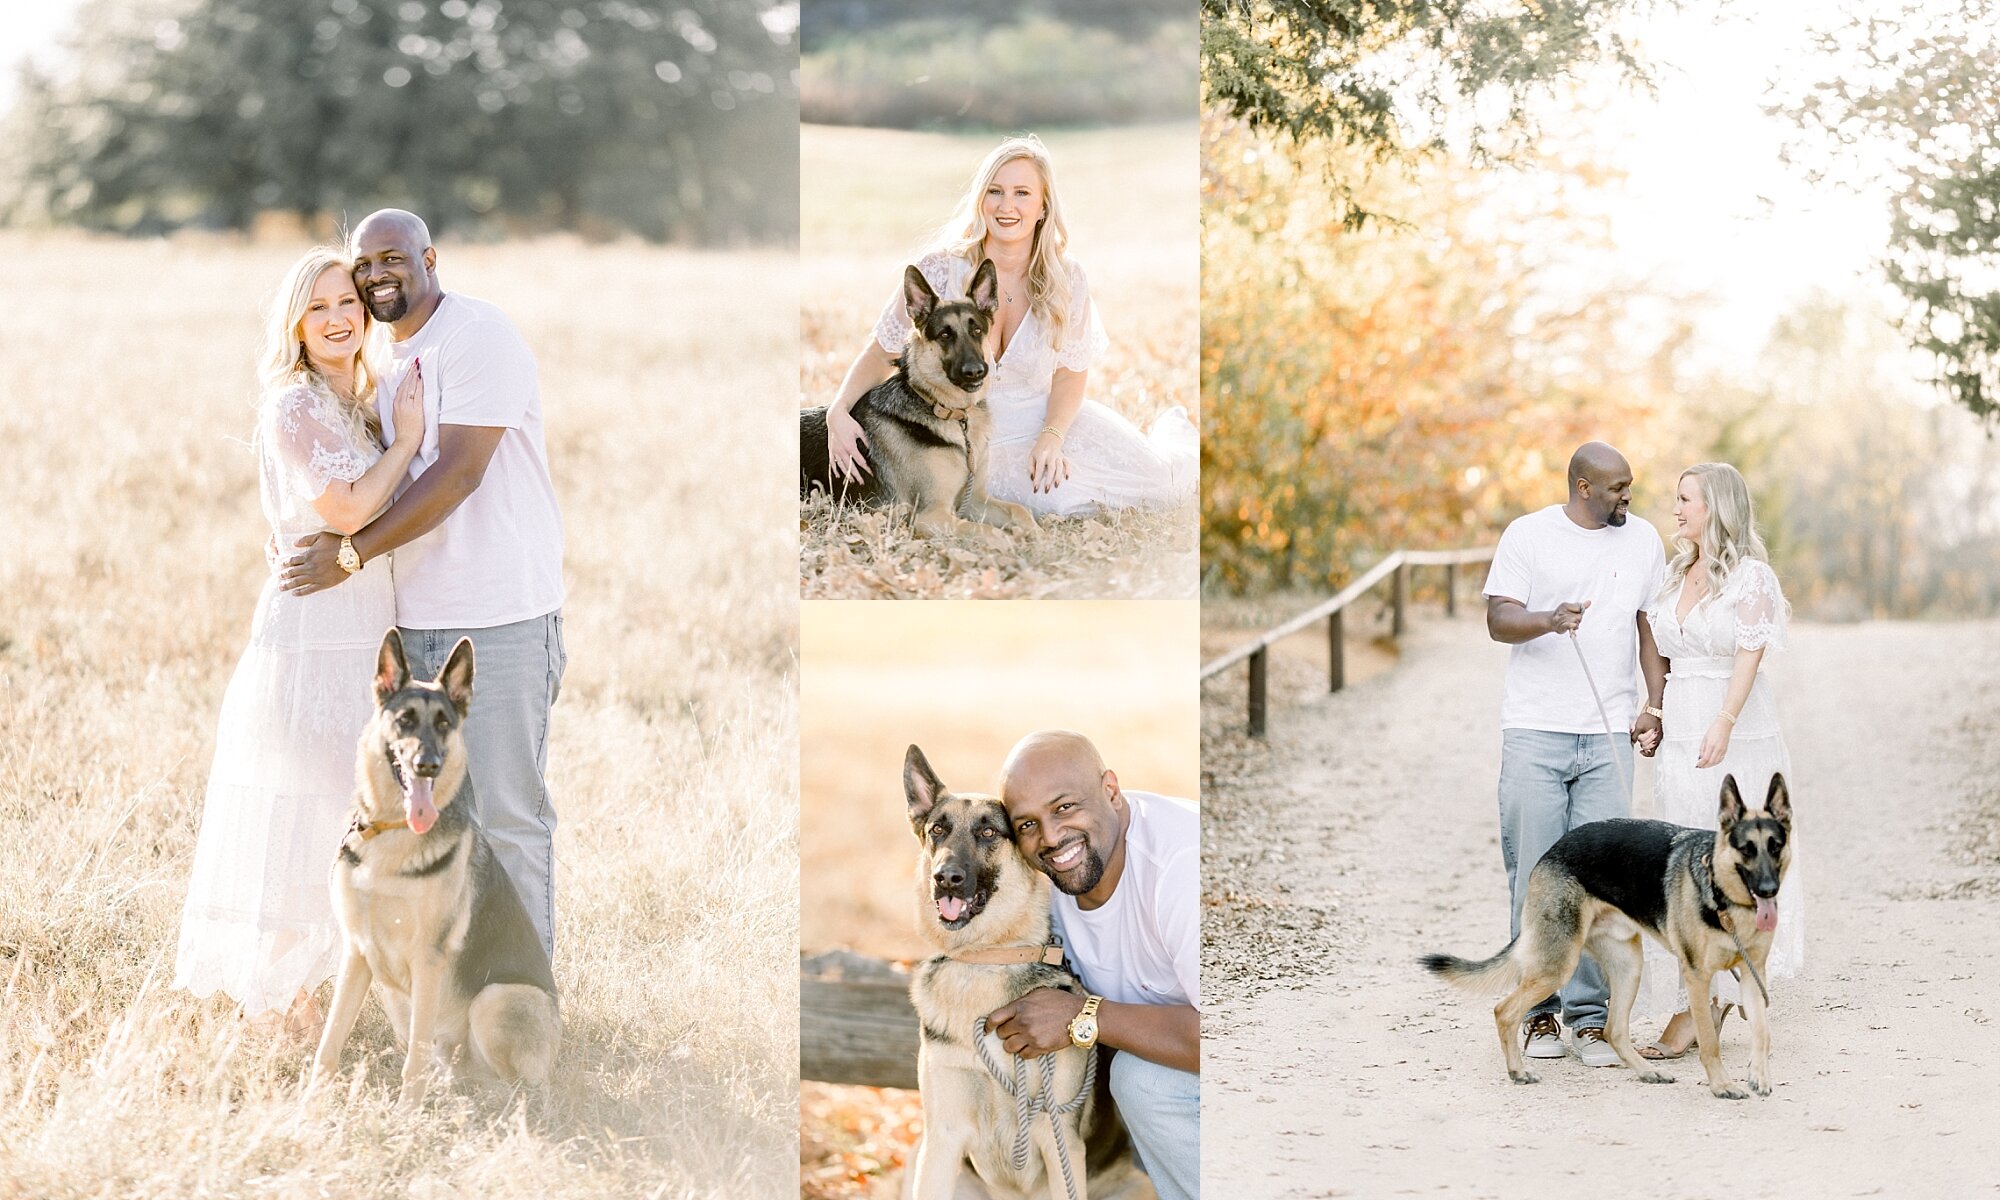 Outdoor engagement photos with family dog in DFW